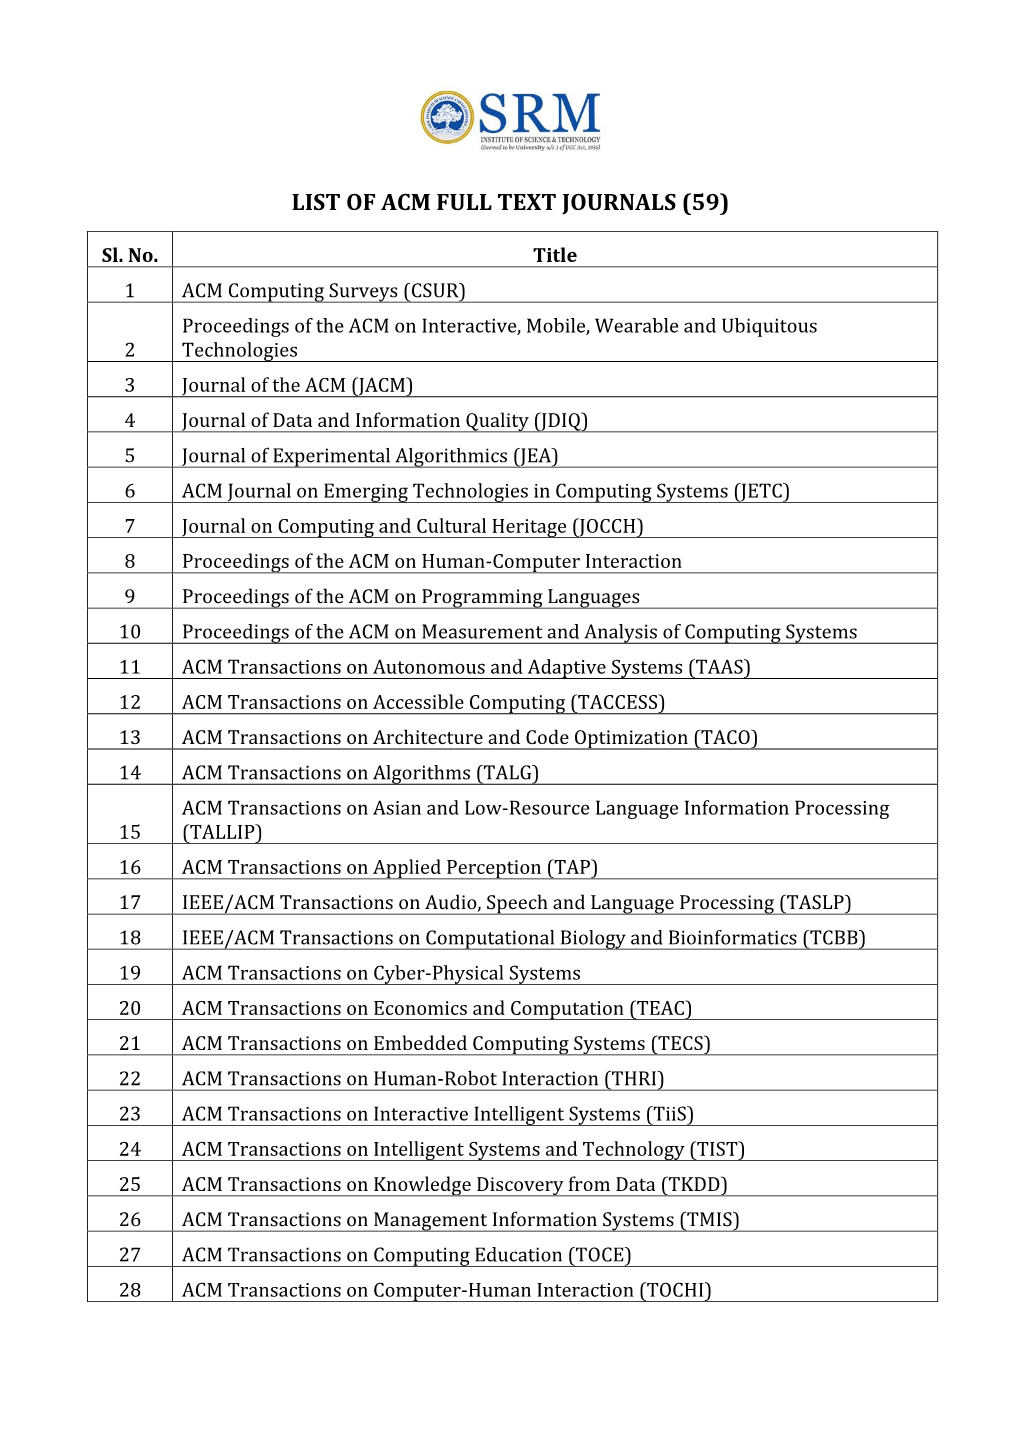 List of Acm Full Text Journals (59)